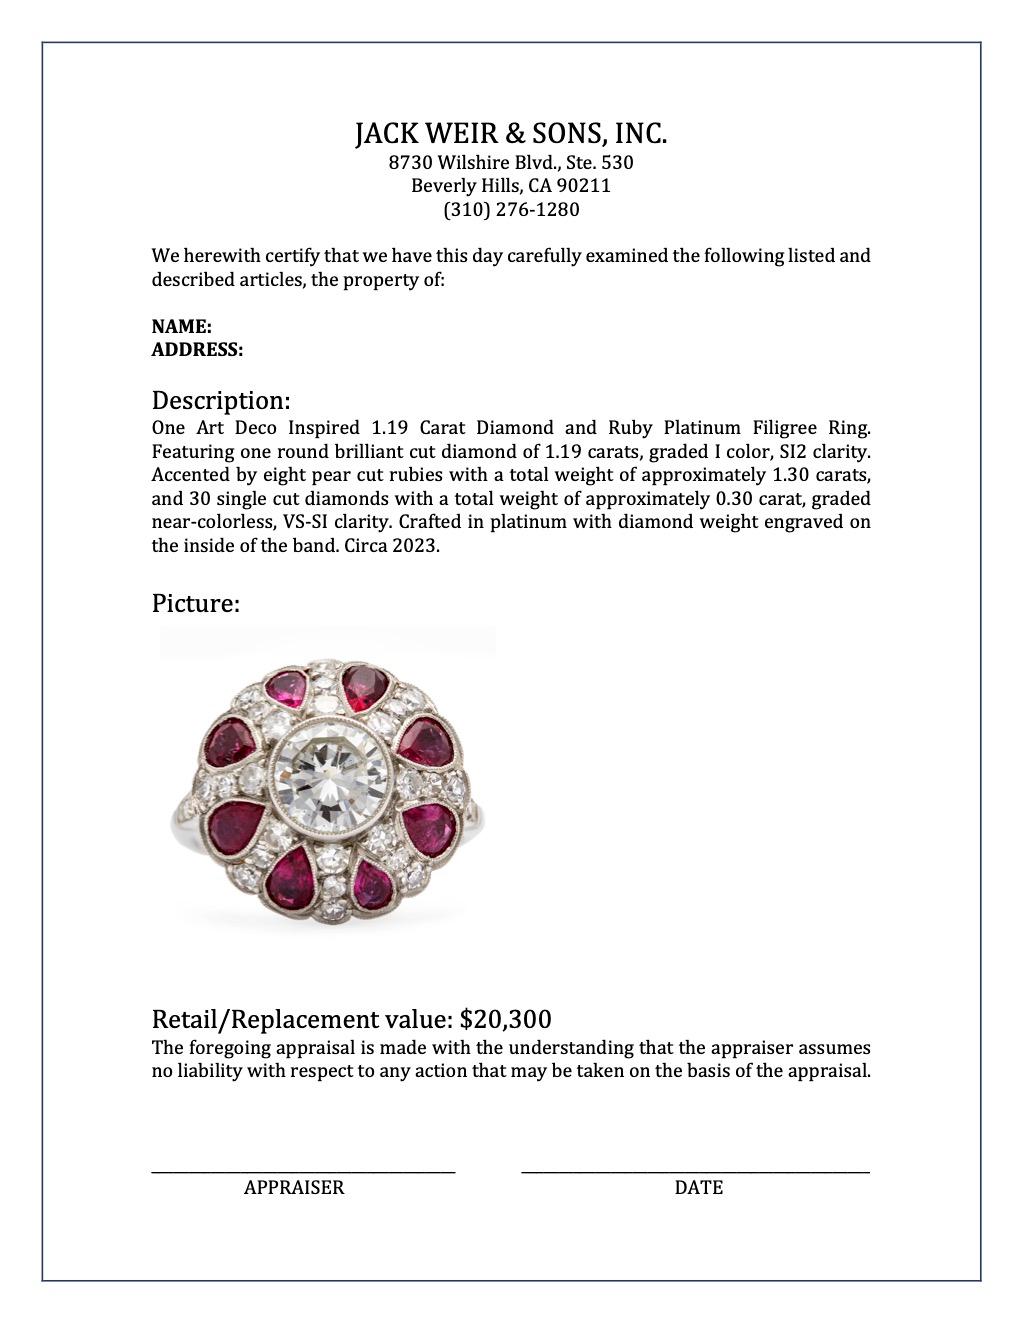 Art Deco Inspired 1.19 Carat Diamond and Ruby Platinum Filigree Ring For Sale 2